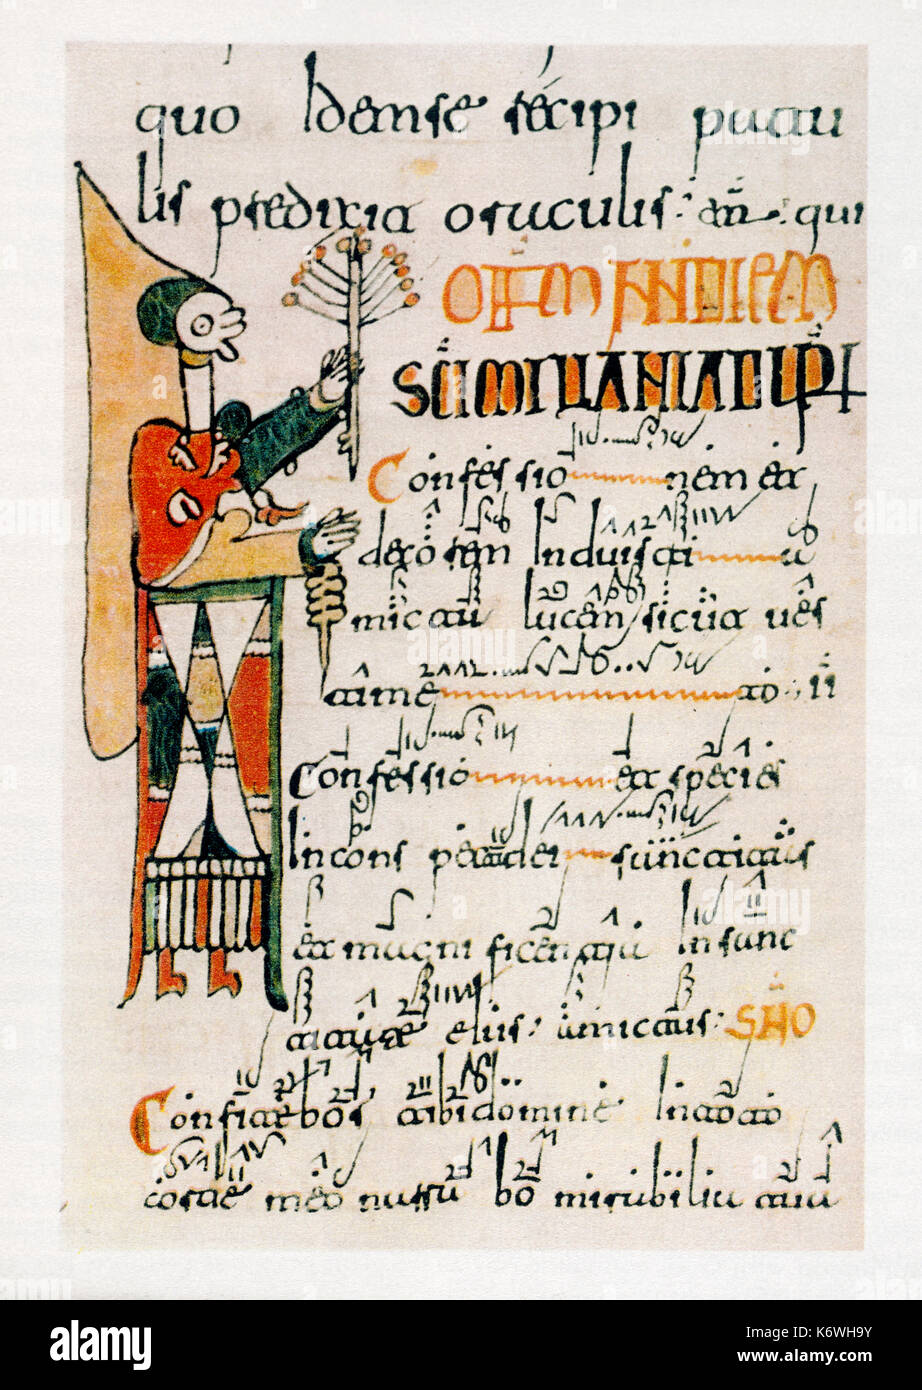 NOTATION - MOZARABIC CHANT - 10th century Illumination from Mozarbic Psalter - notation appears between the lines Stock Photo